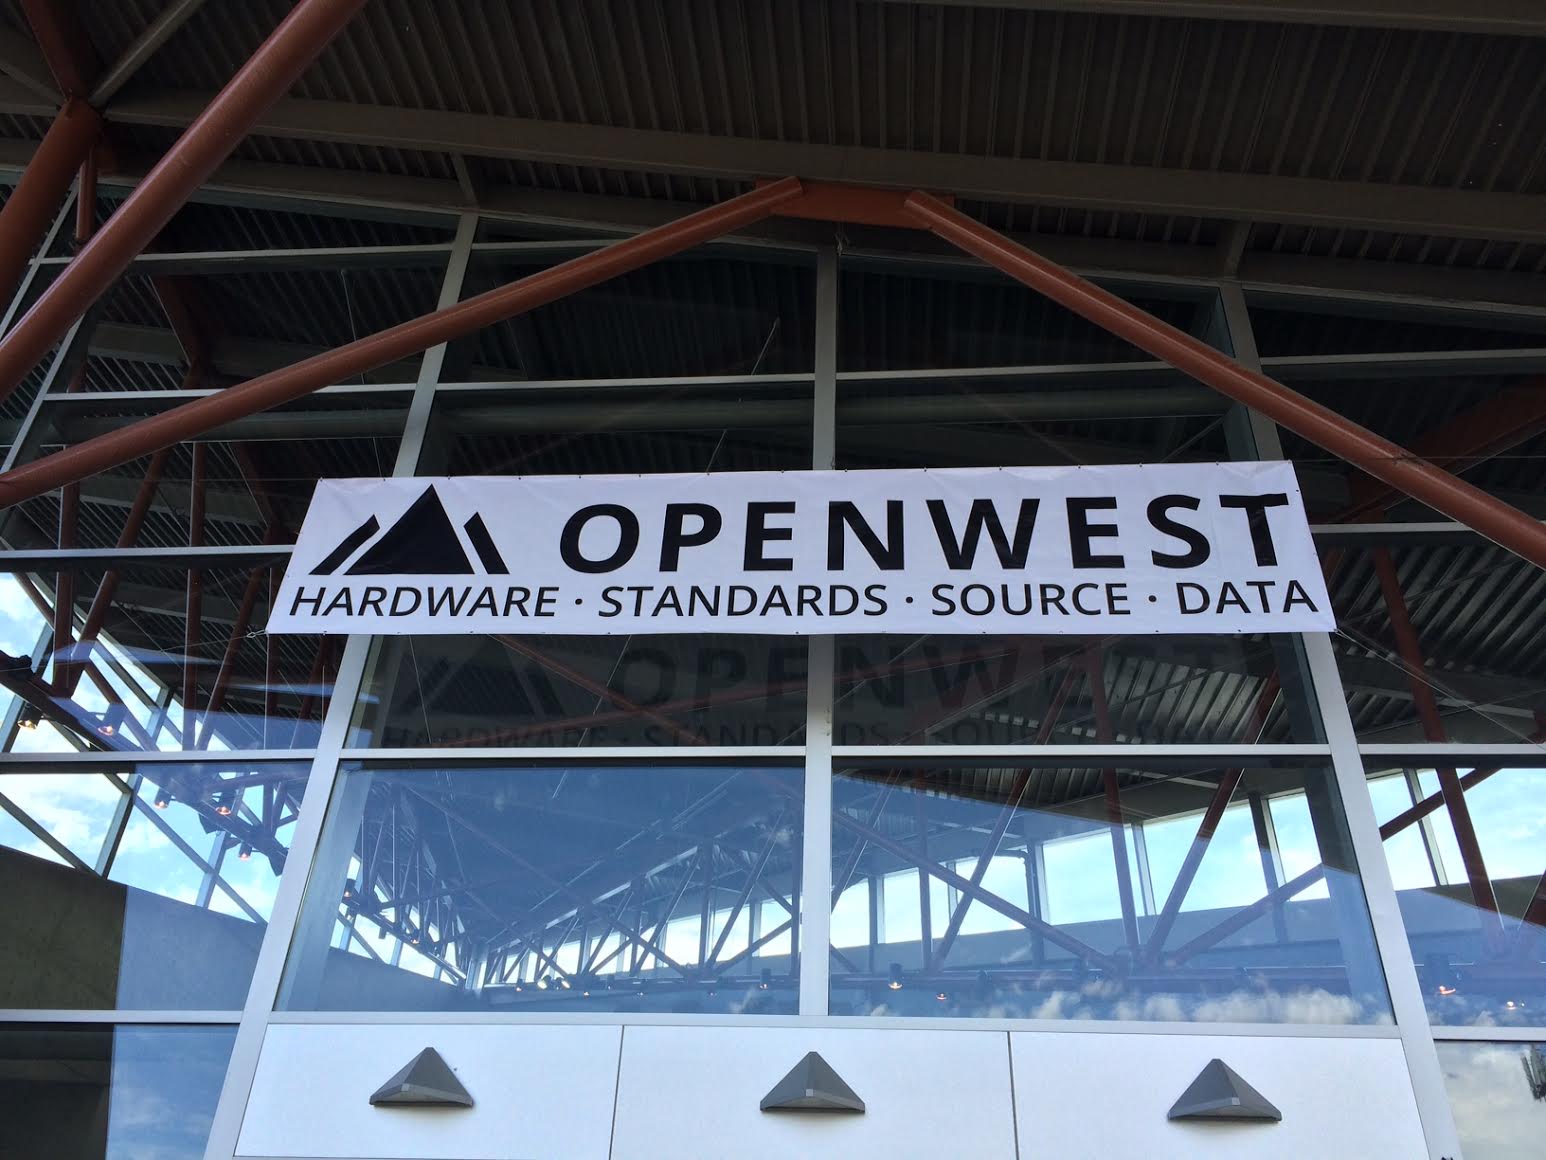 OpenWest conference center